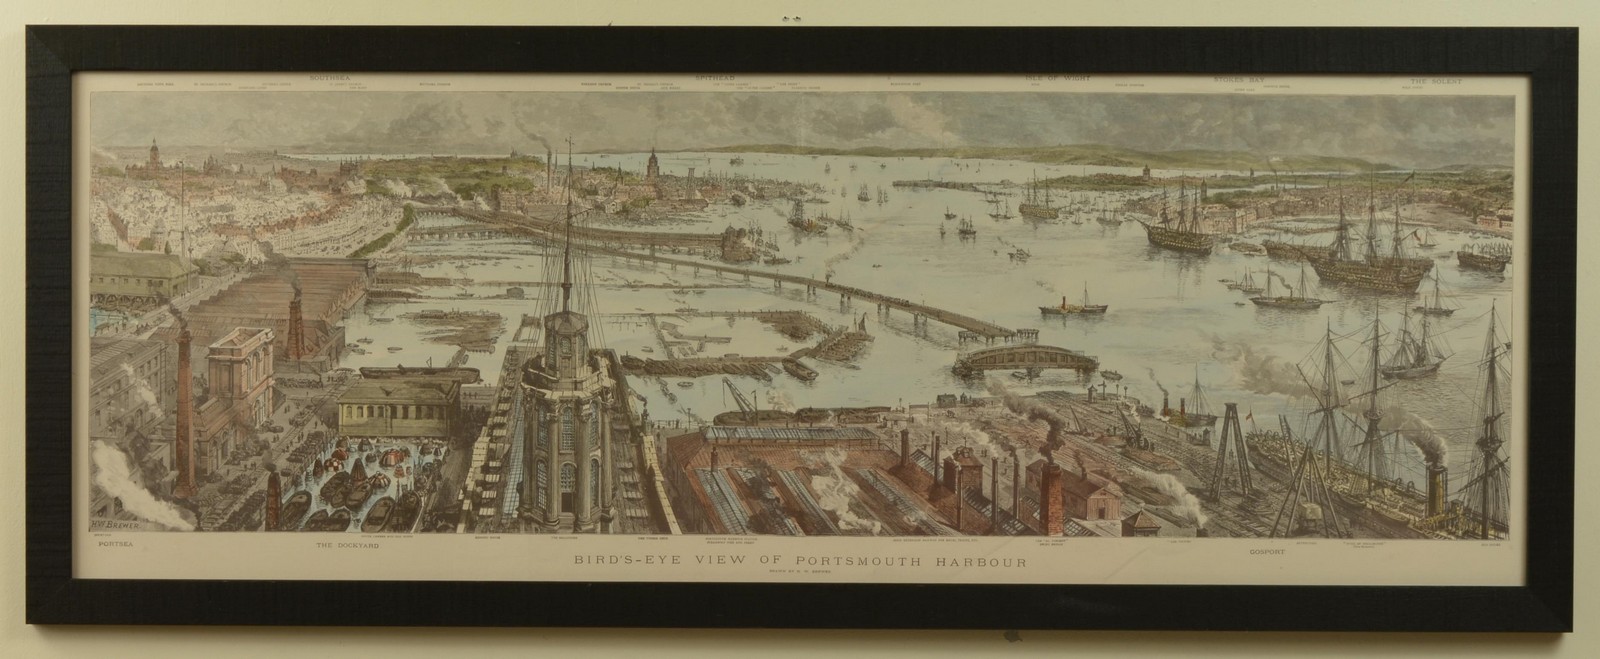 Bird's-Eye View of Portsmouth Harbour, a hand coloured print after H.W. Brewer depicting an